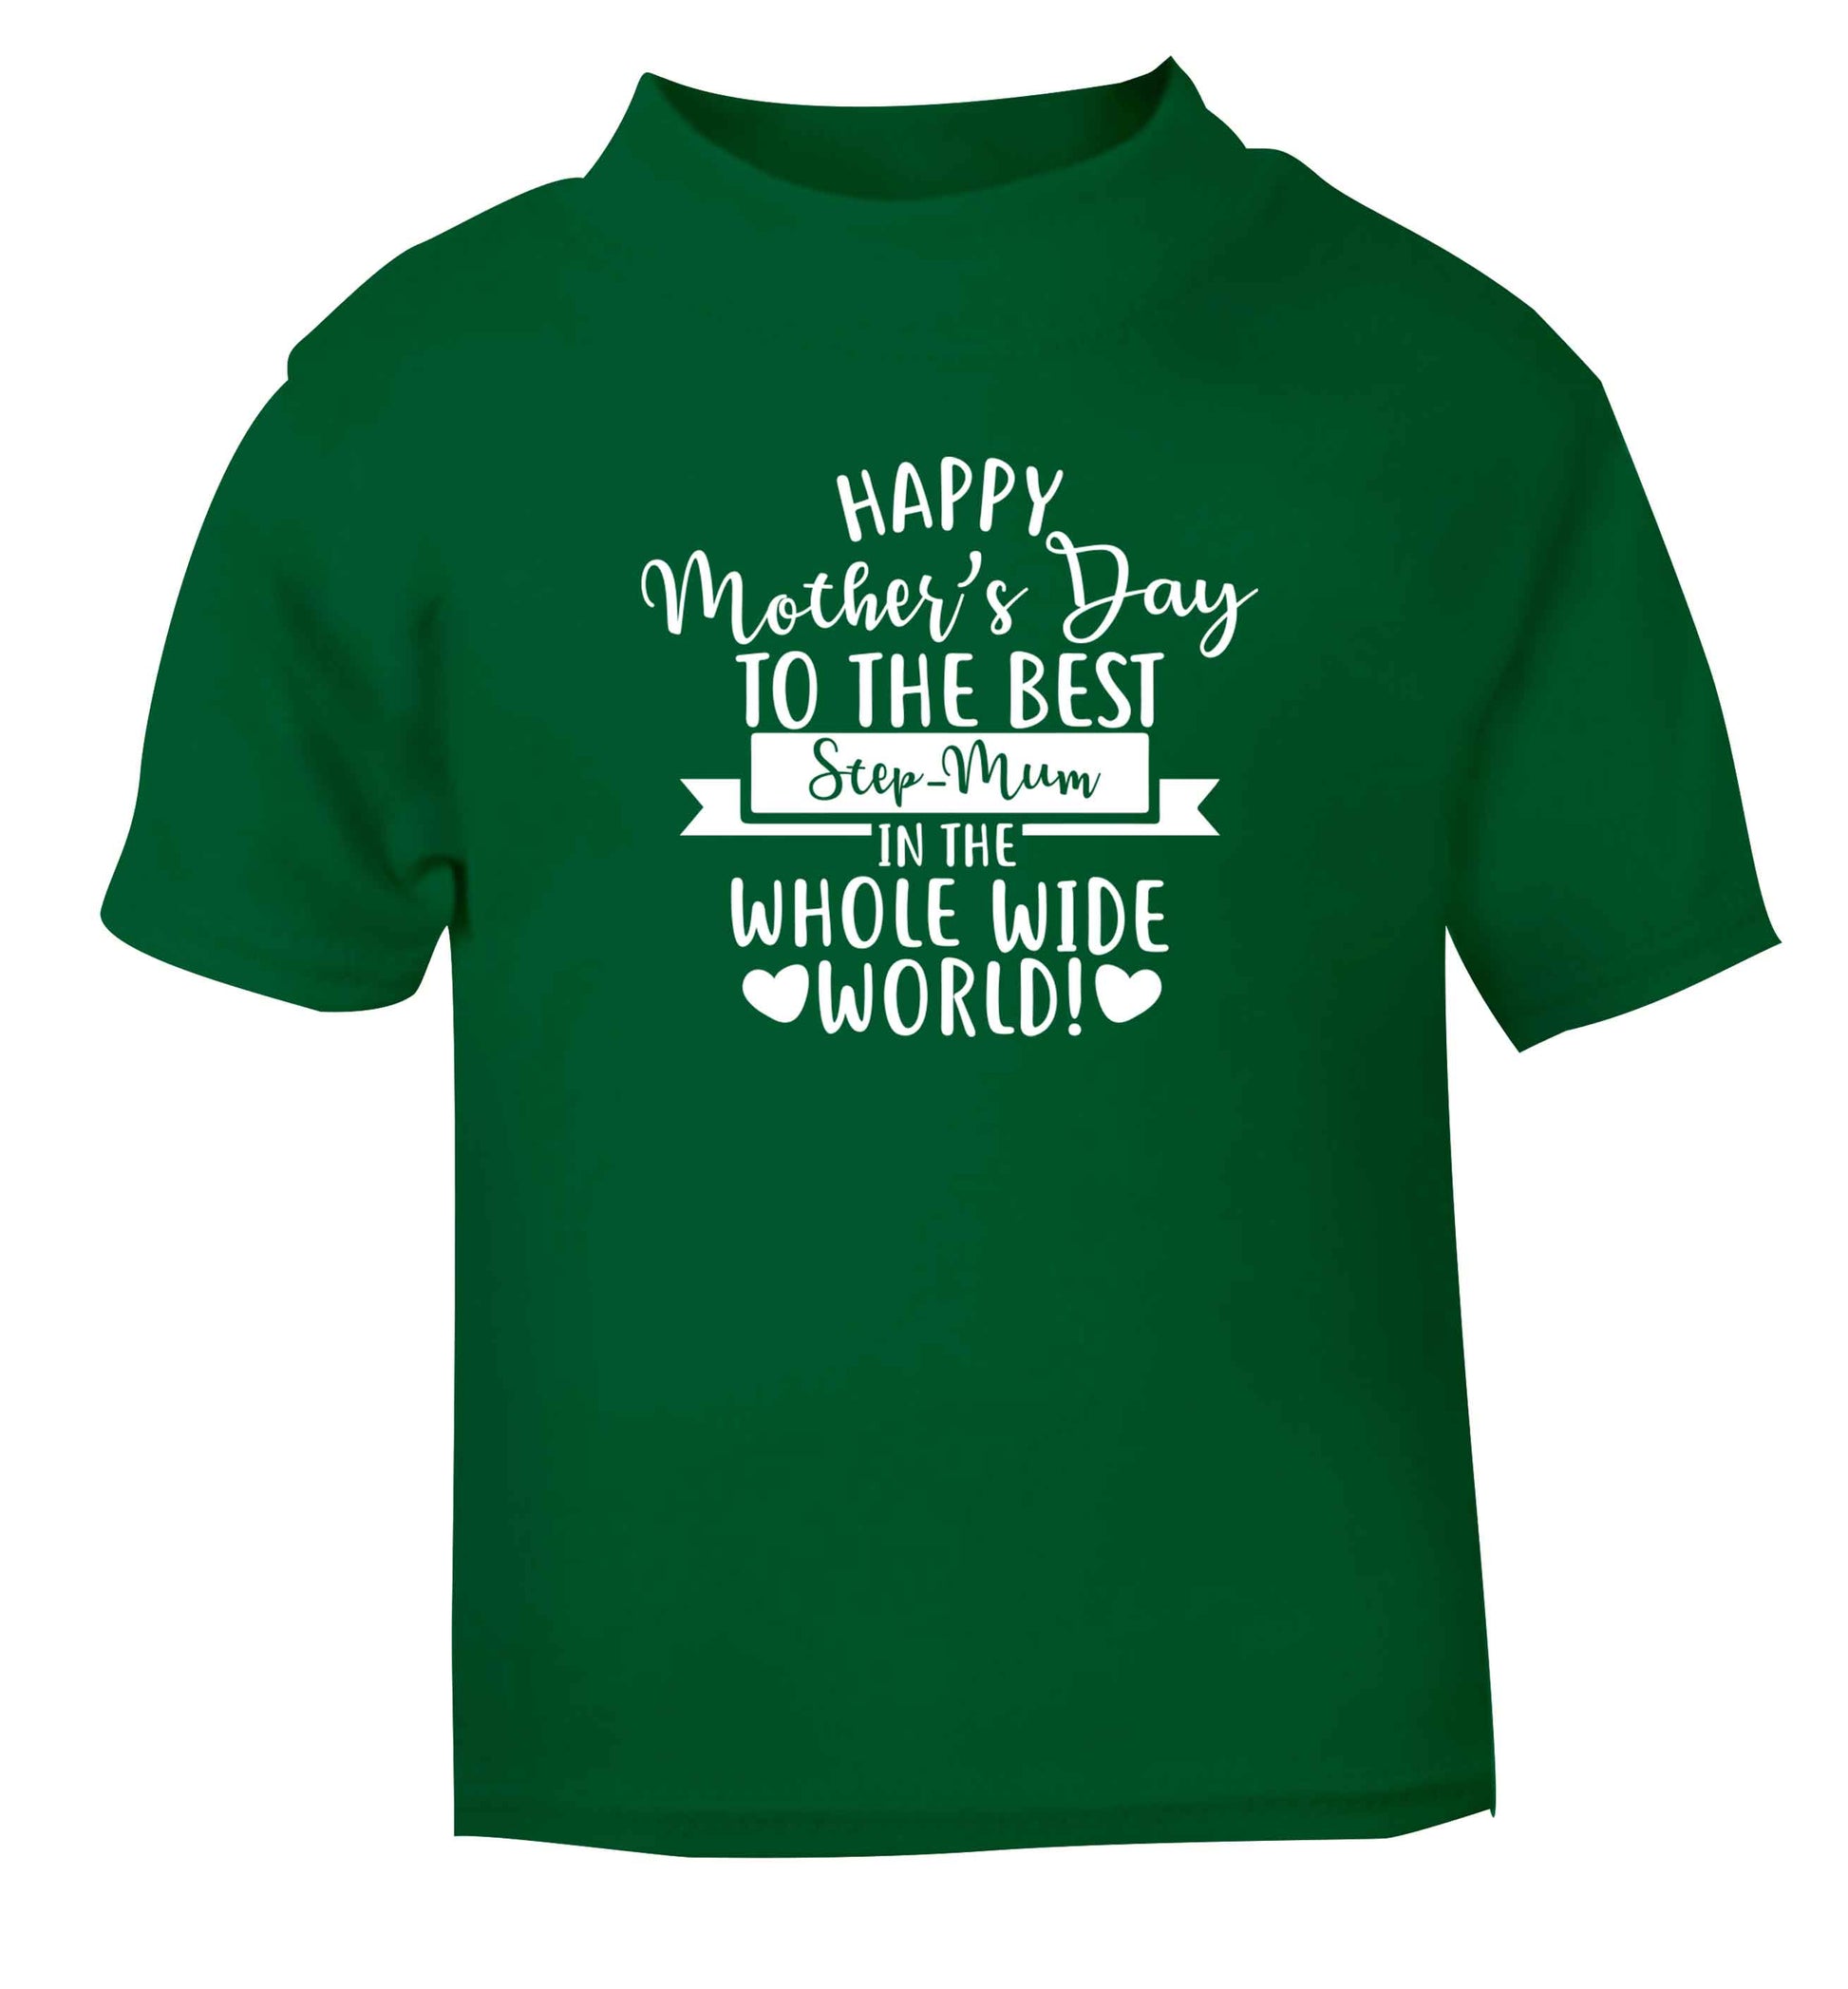 Happy mother's day to the best step-mum in the world green baby toddler Tshirt 2 Years